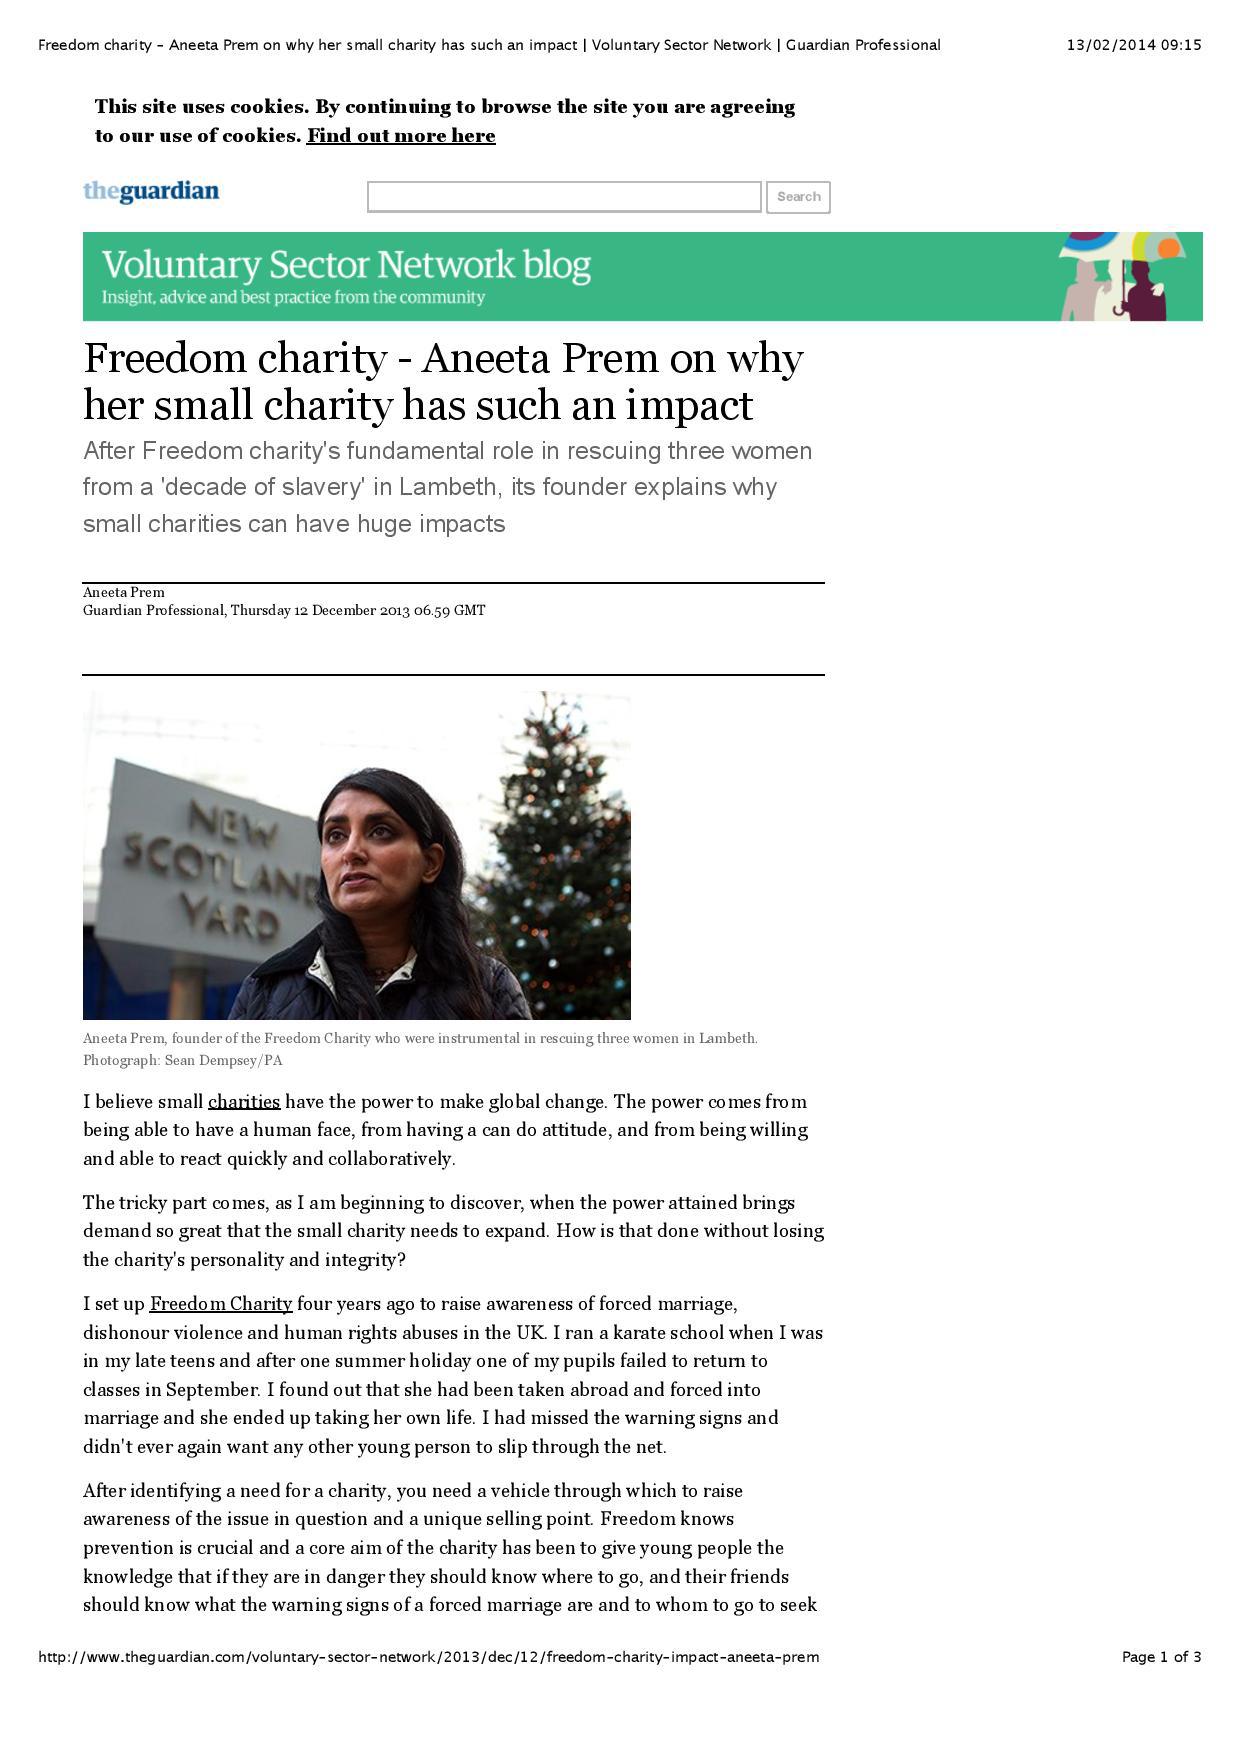 guardian-freedom-charity-aneeta-prem-on-why-her-small-charity-has-such-an-impact-voluntary-sector-network-guardian-professional-page-001